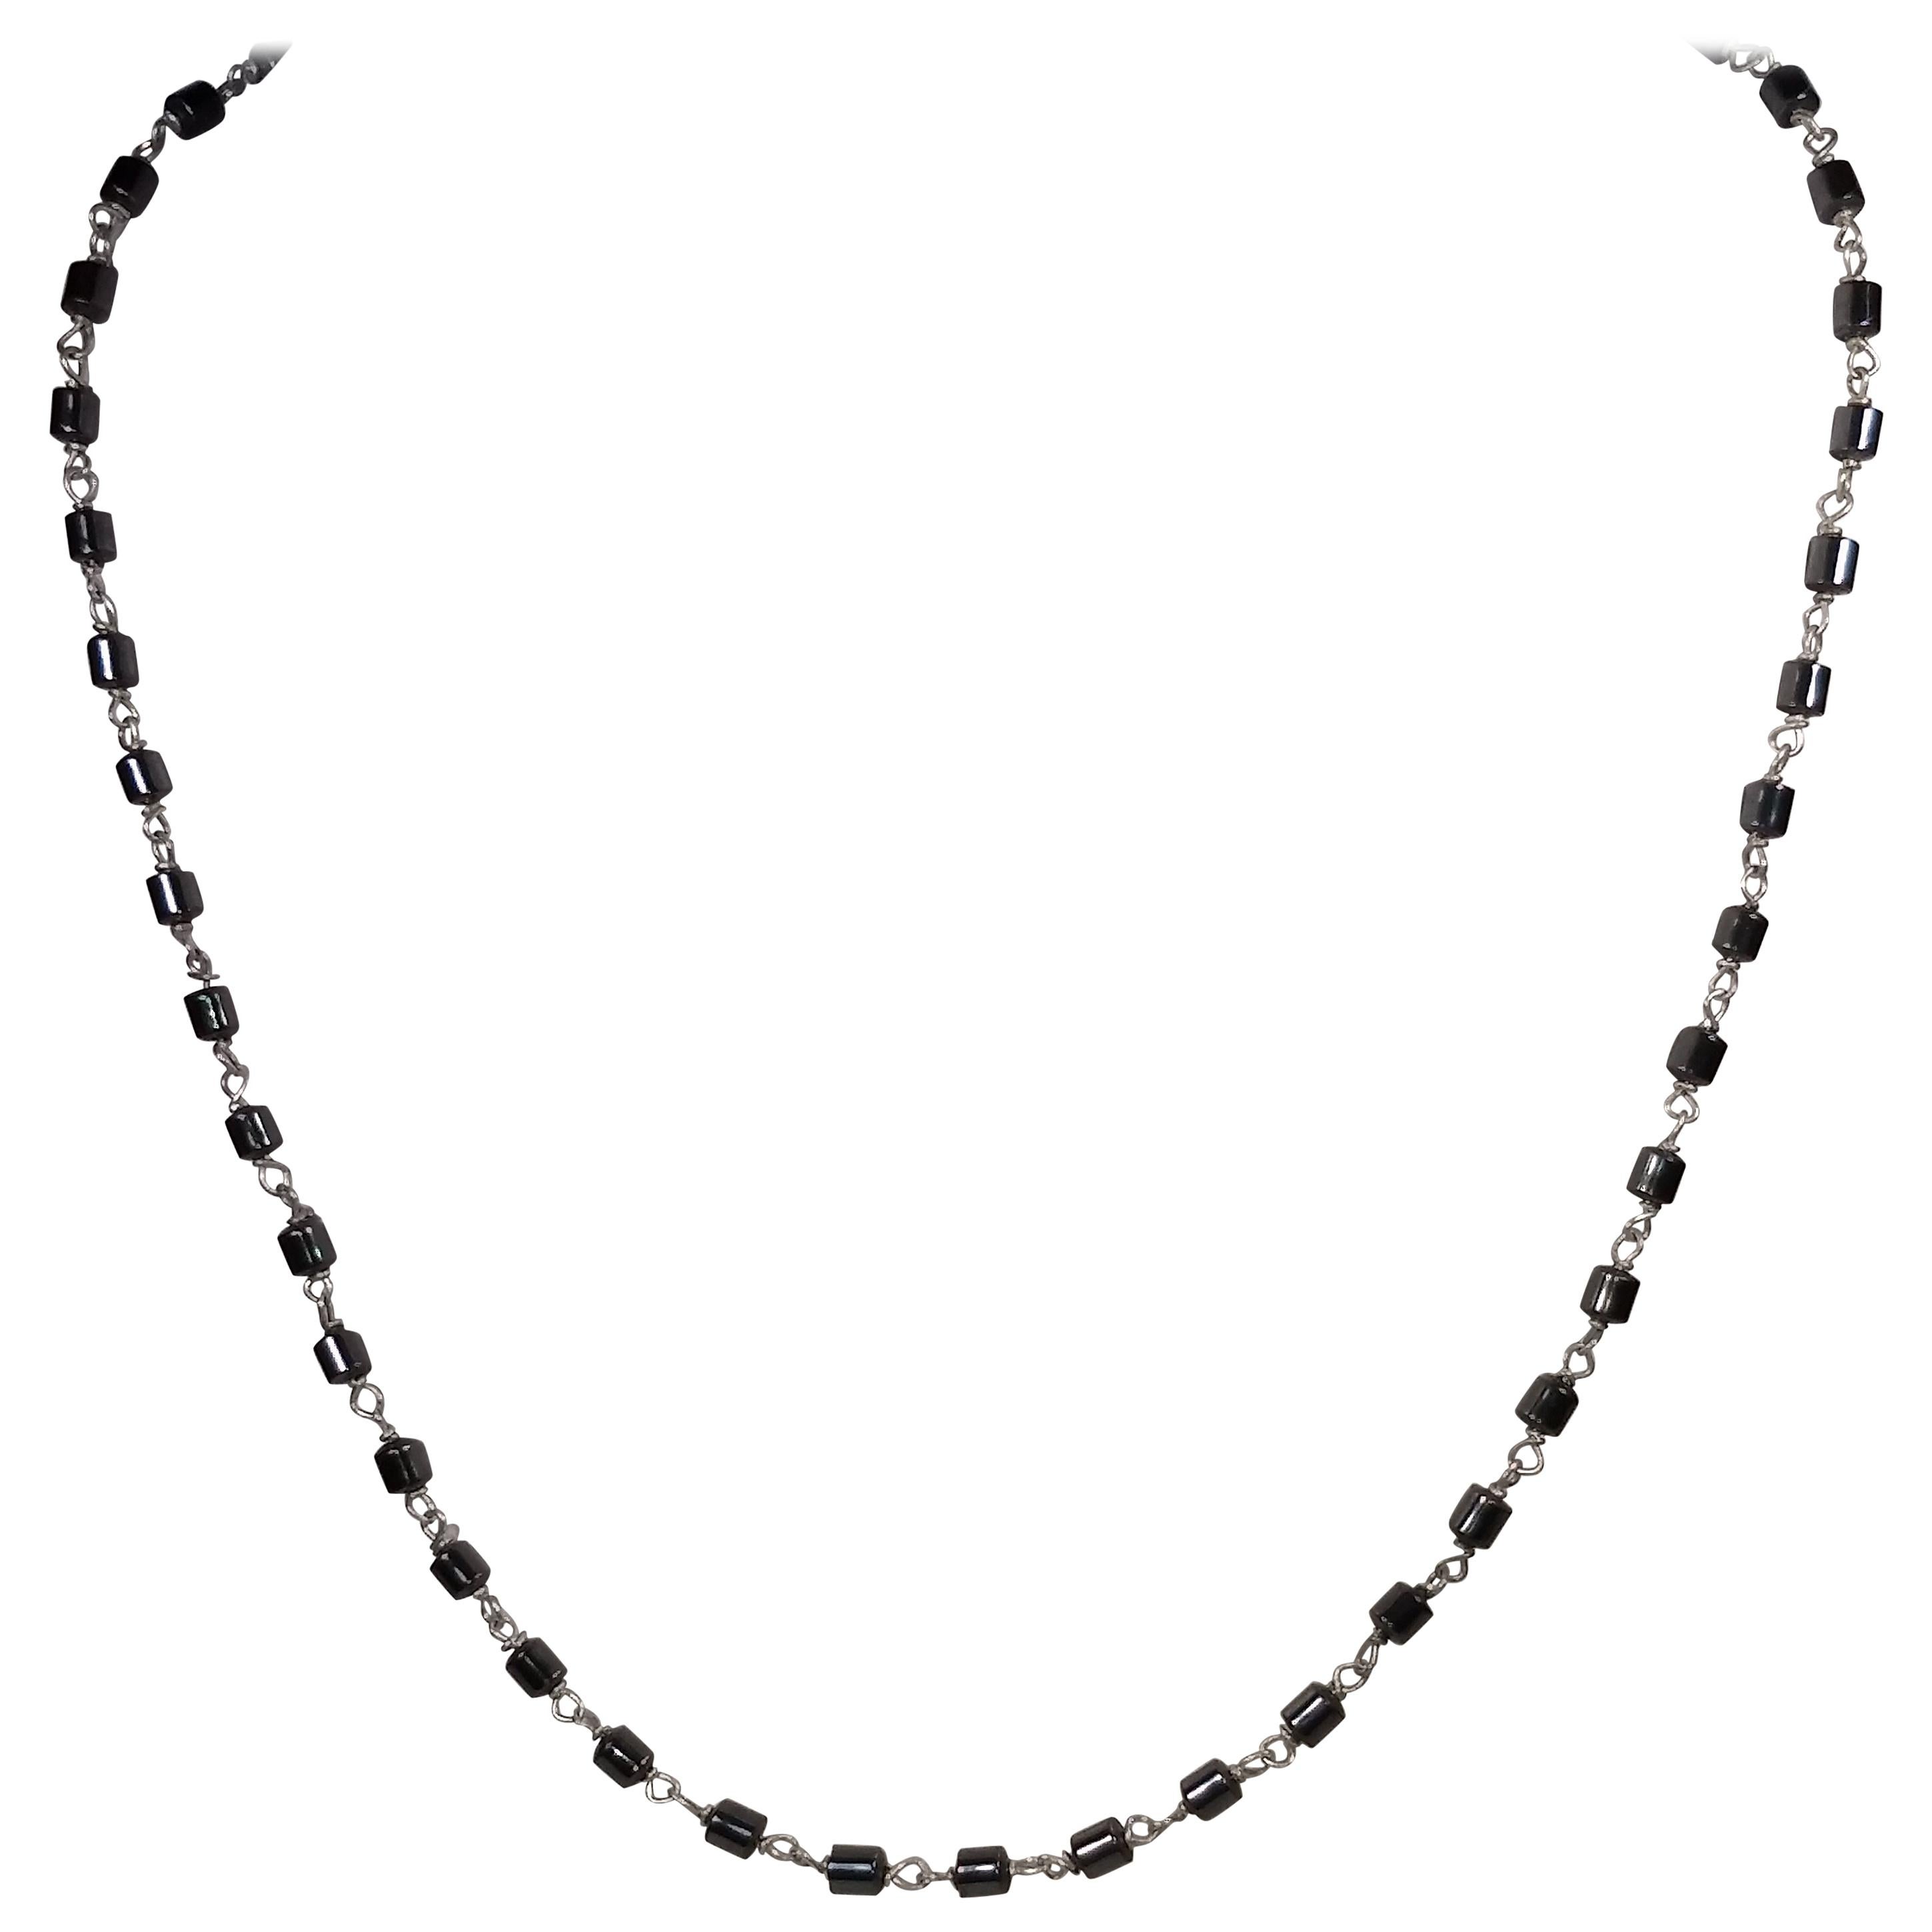 Alberto Juan Mexican Handmade Sterling Silver Hematite Bead Necklace For Sale